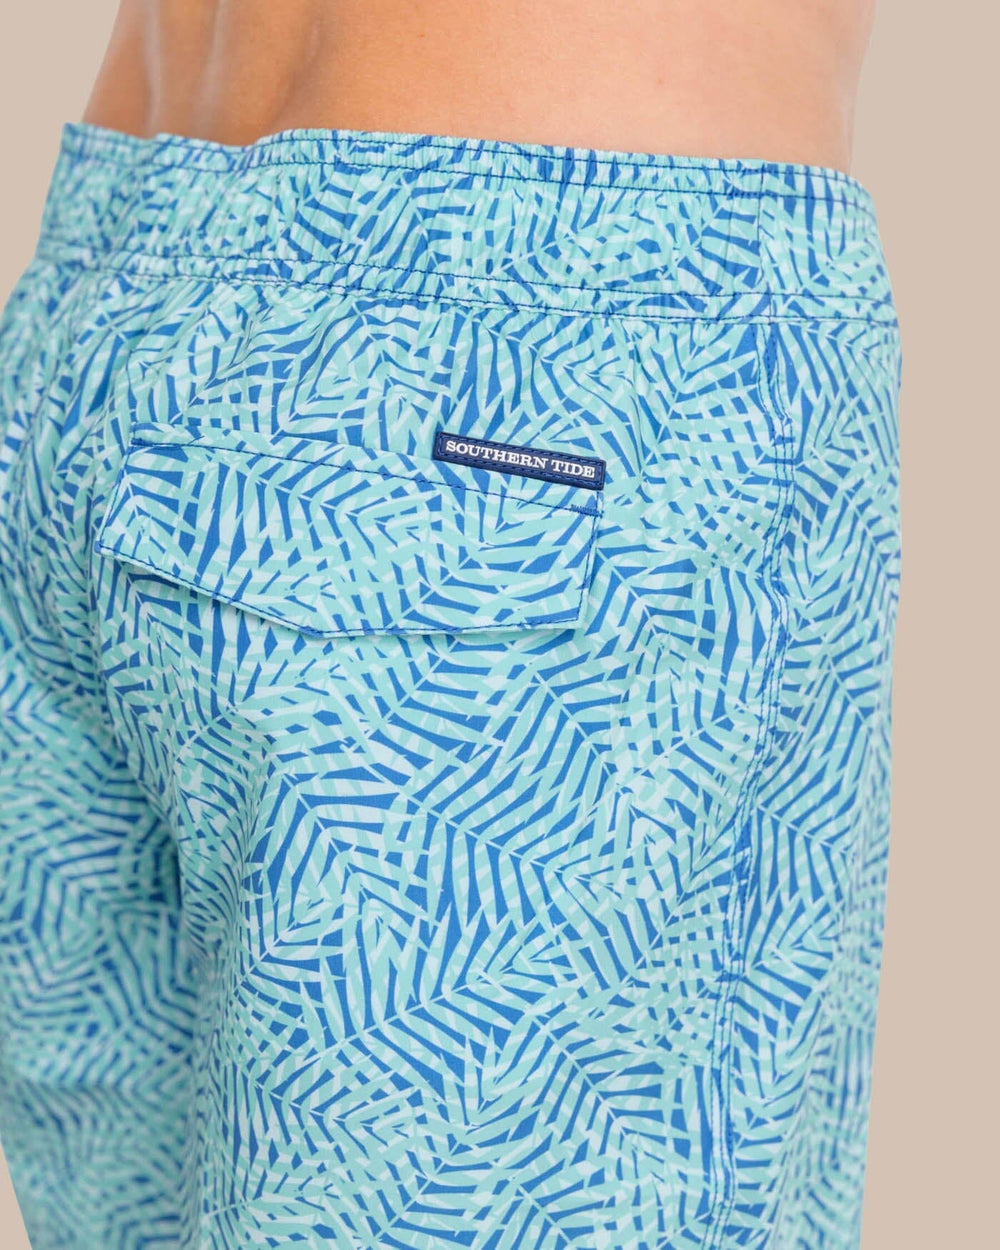 The detail view of the Southern Tide Vibin' Palm Printed Swim Short by Southern Tide - Atlantic Blue